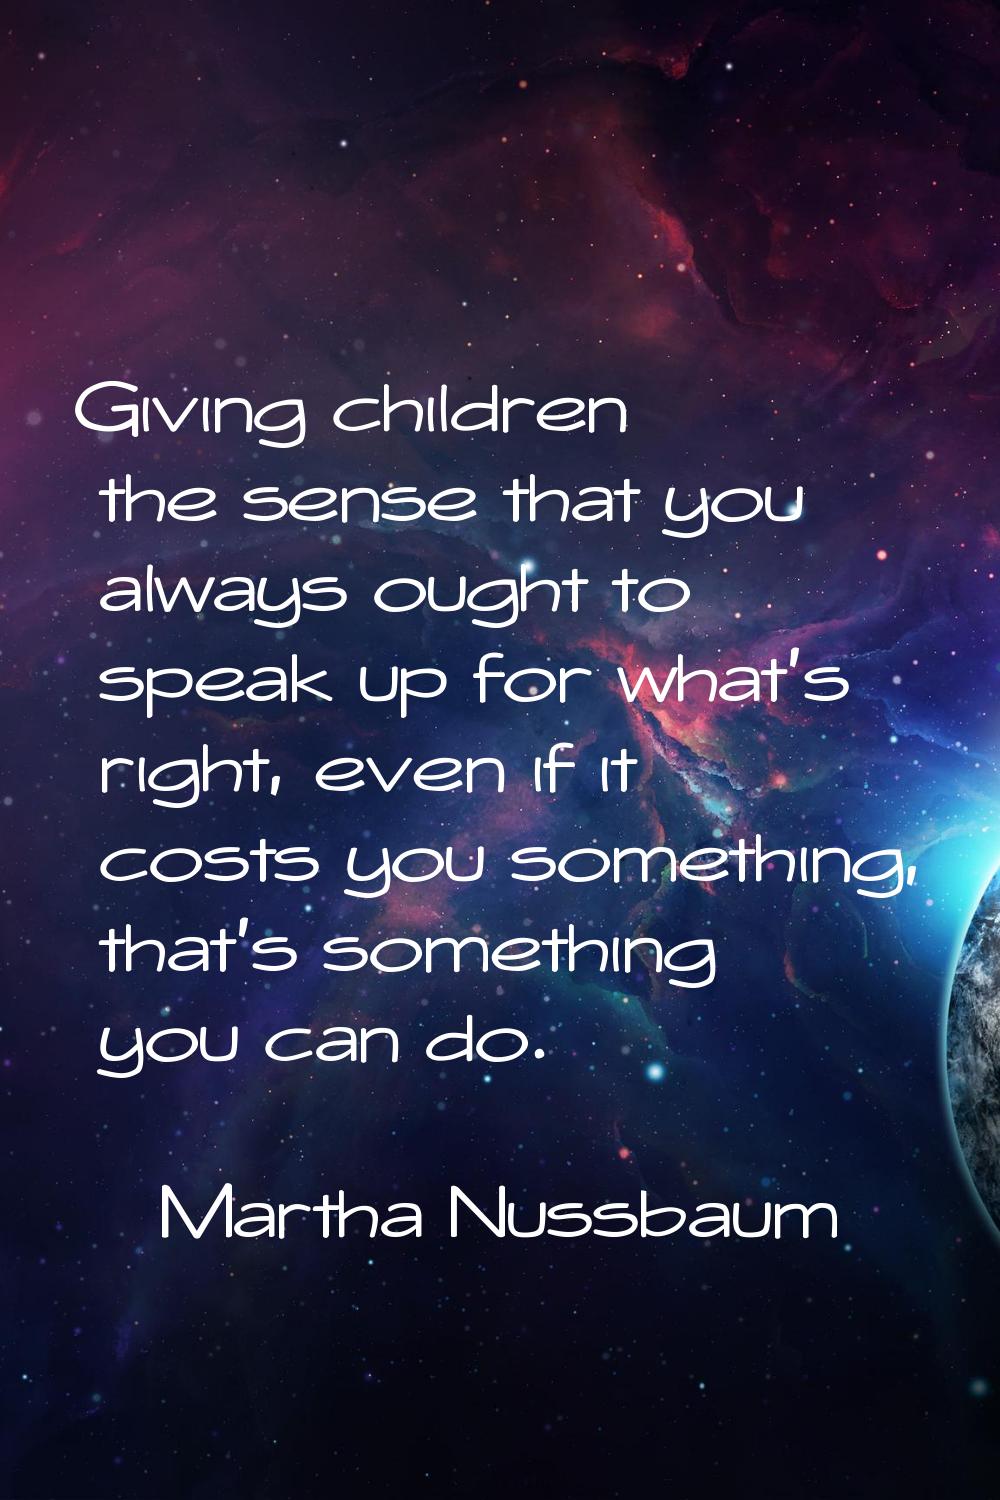 Giving children the sense that you always ought to speak up for what's right, even if it costs you 